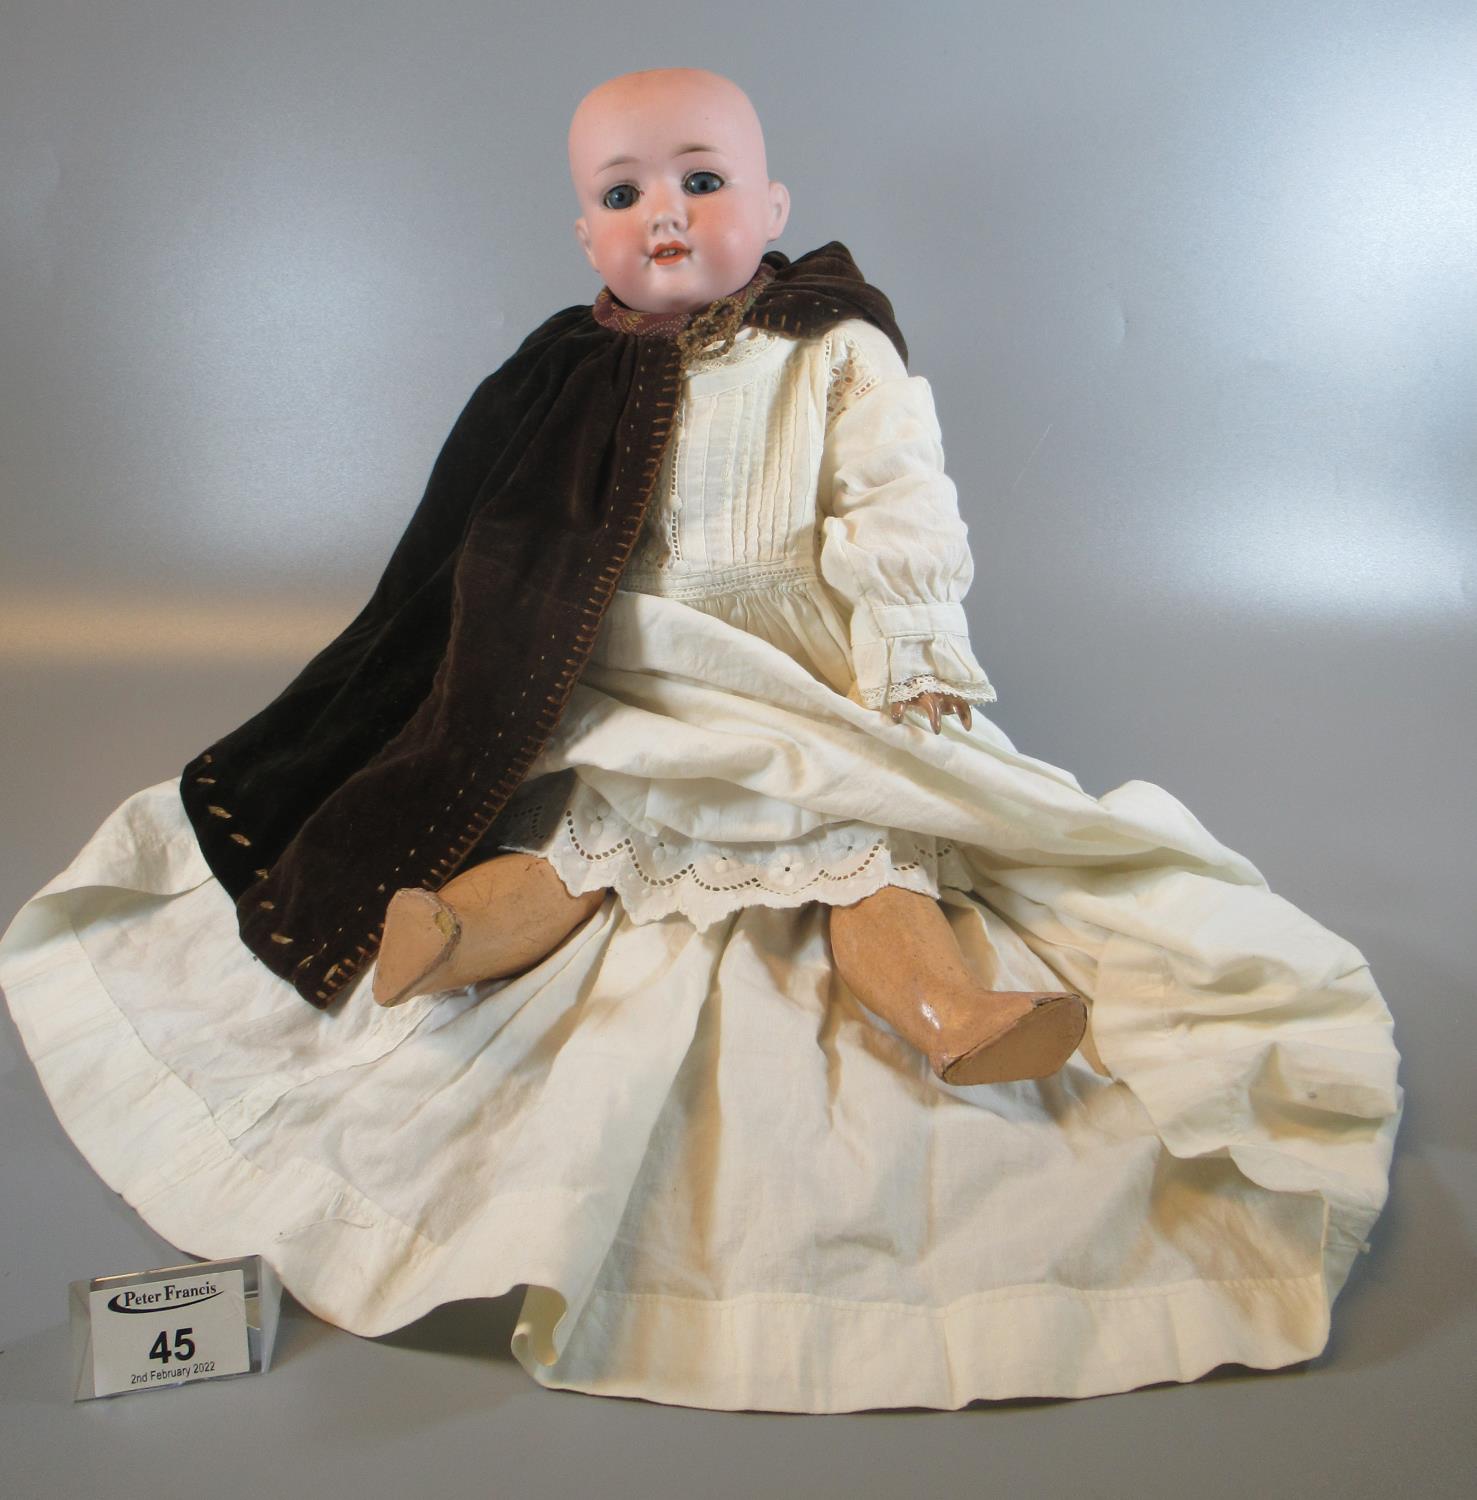 Armand & Marseille 390 bisque headed doll with painted features and closing eyes, jointed